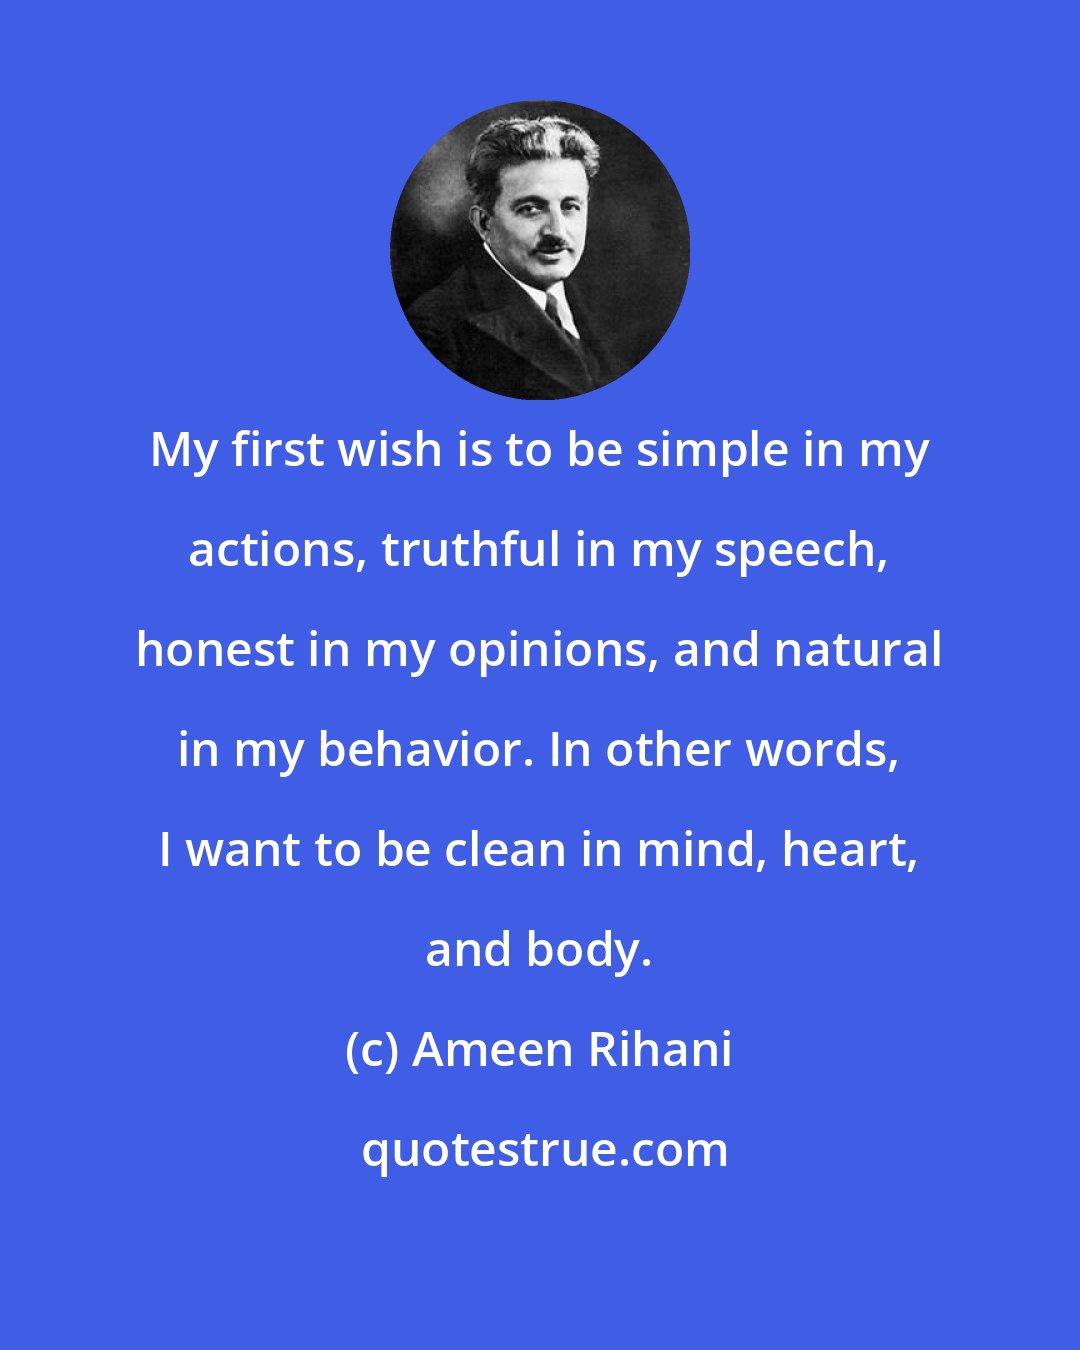 Ameen Rihani: My first wish is to be simple in my actions, truthful in my speech, honest in my opinions, and natural in my behavior. In other words, I want to be clean in mind, heart, and body.